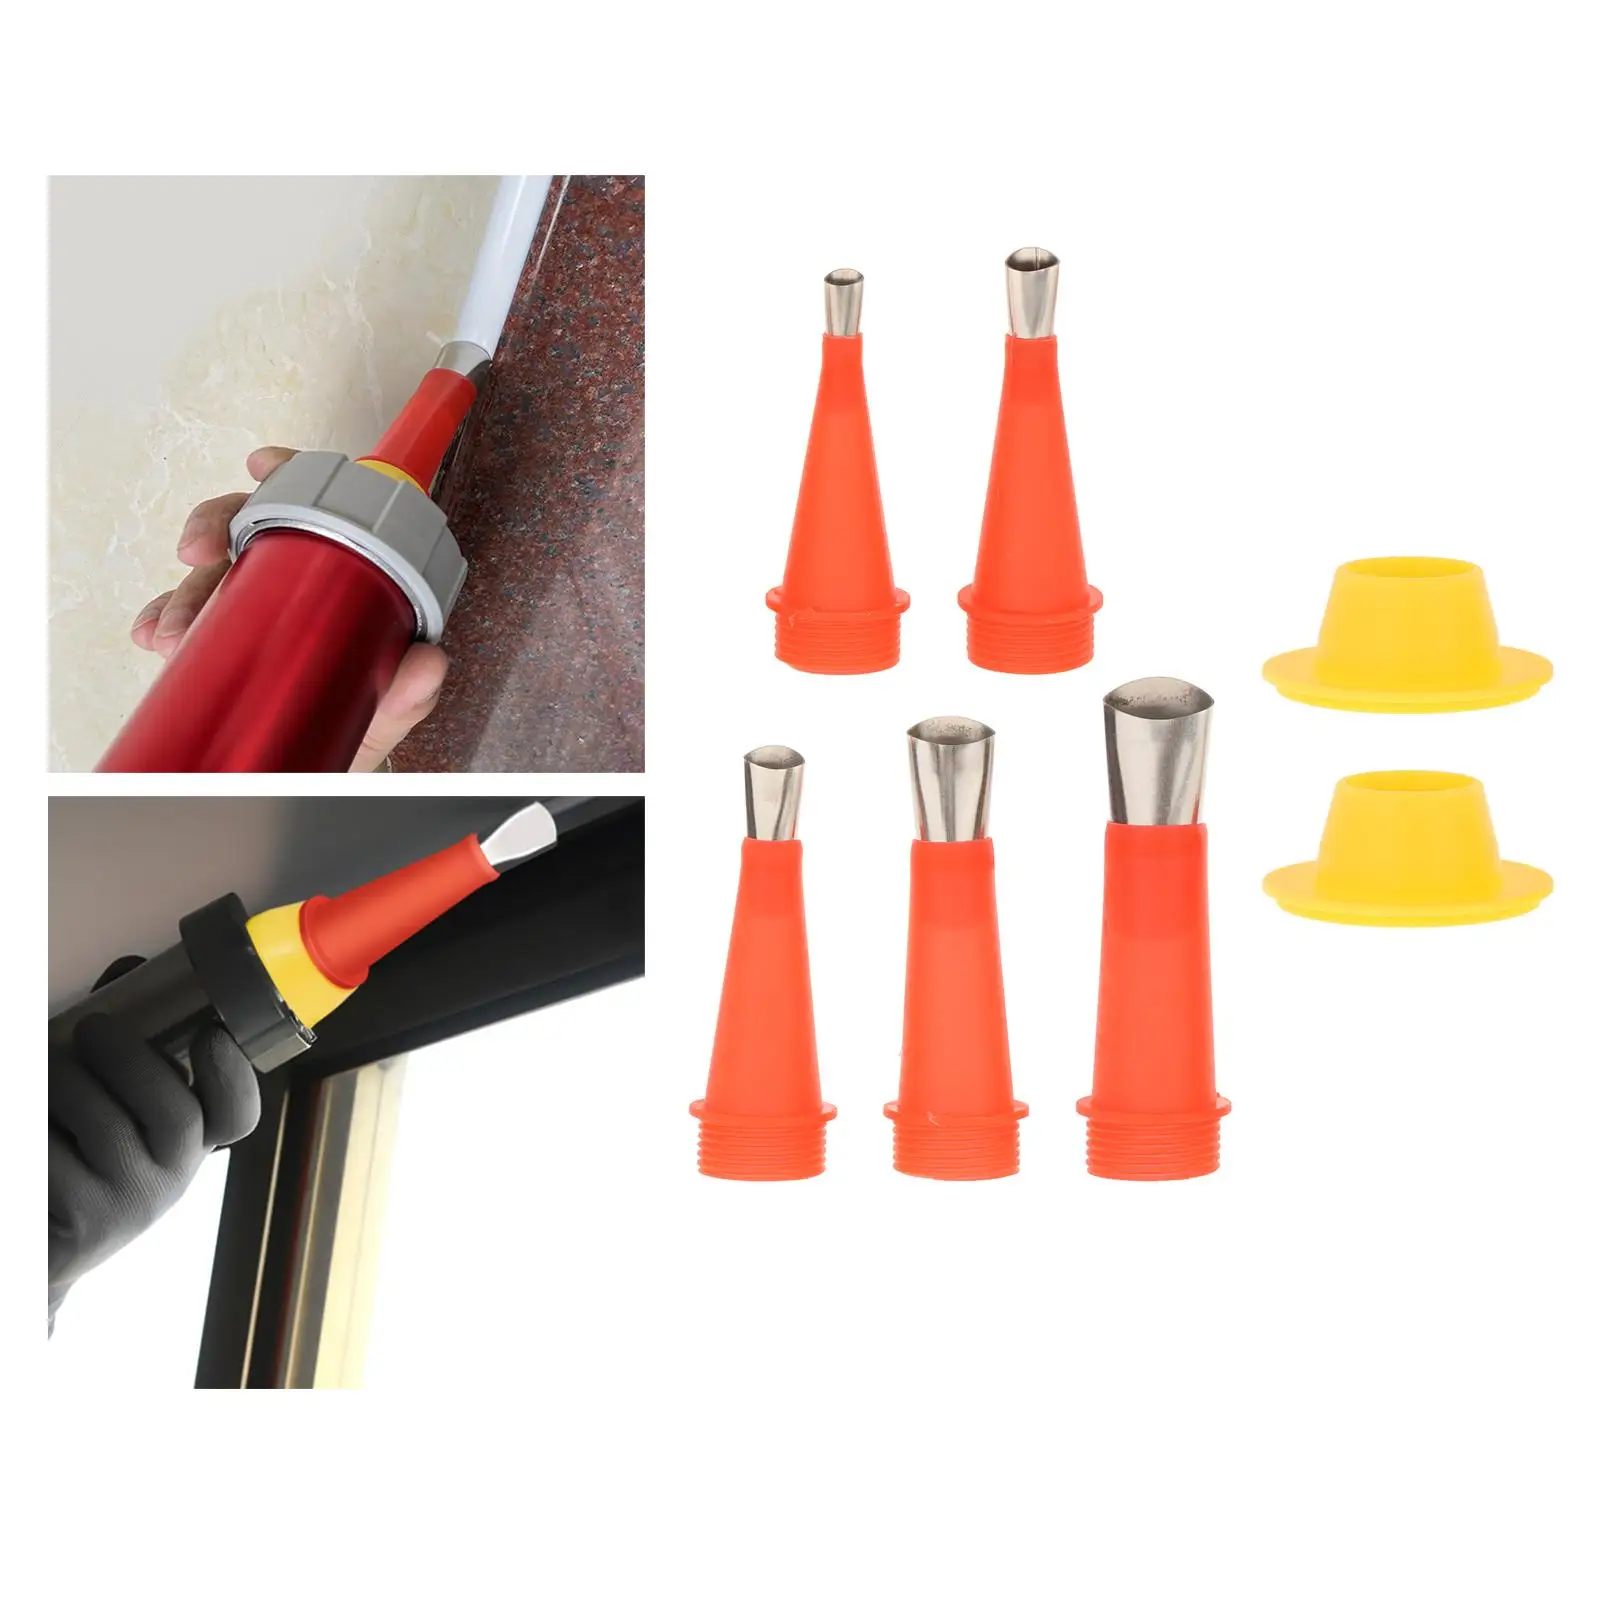 7x Reusable Caulking Nozzle Tool Set with Connection Bases Replacement Caulking Finisher Nozzle Kit for Bathroom Home Window